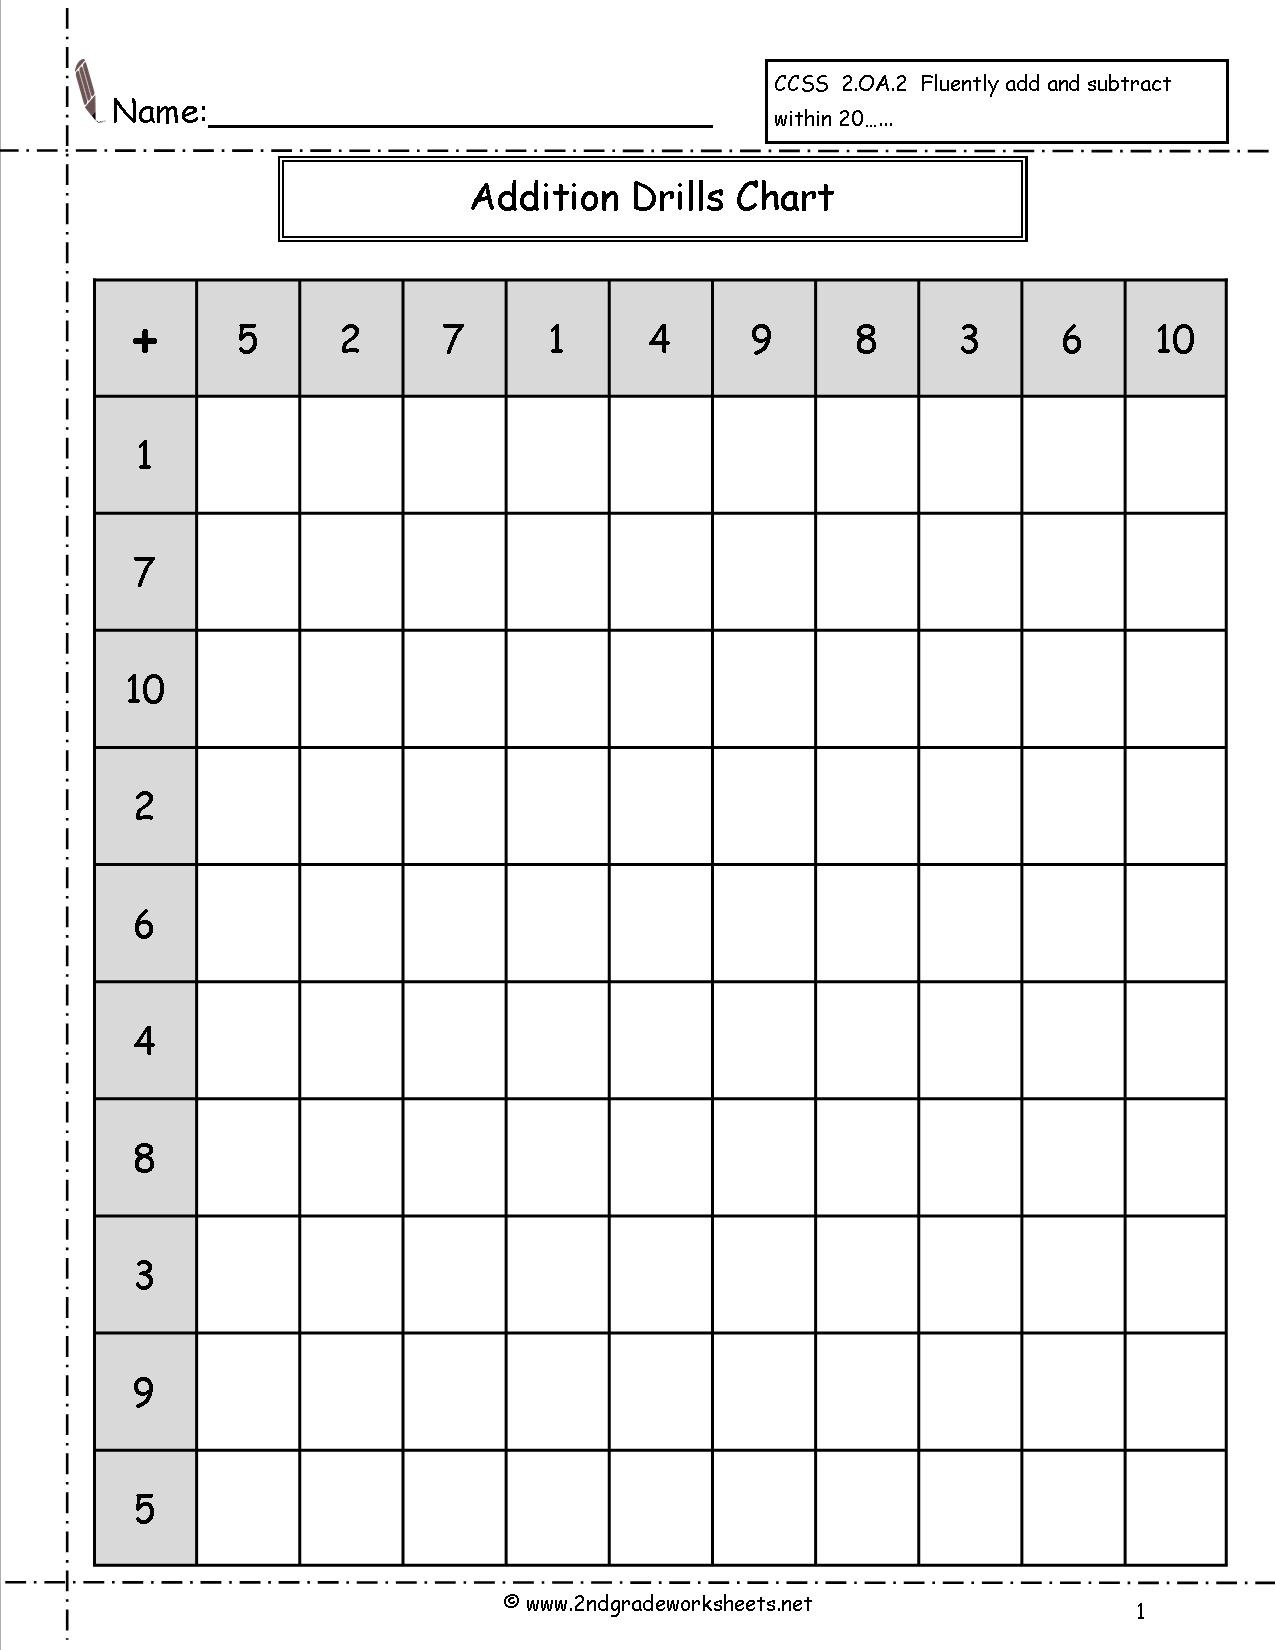 Single Digit Addition Fluency Drills Worksheets - Free Printable Addition Chart